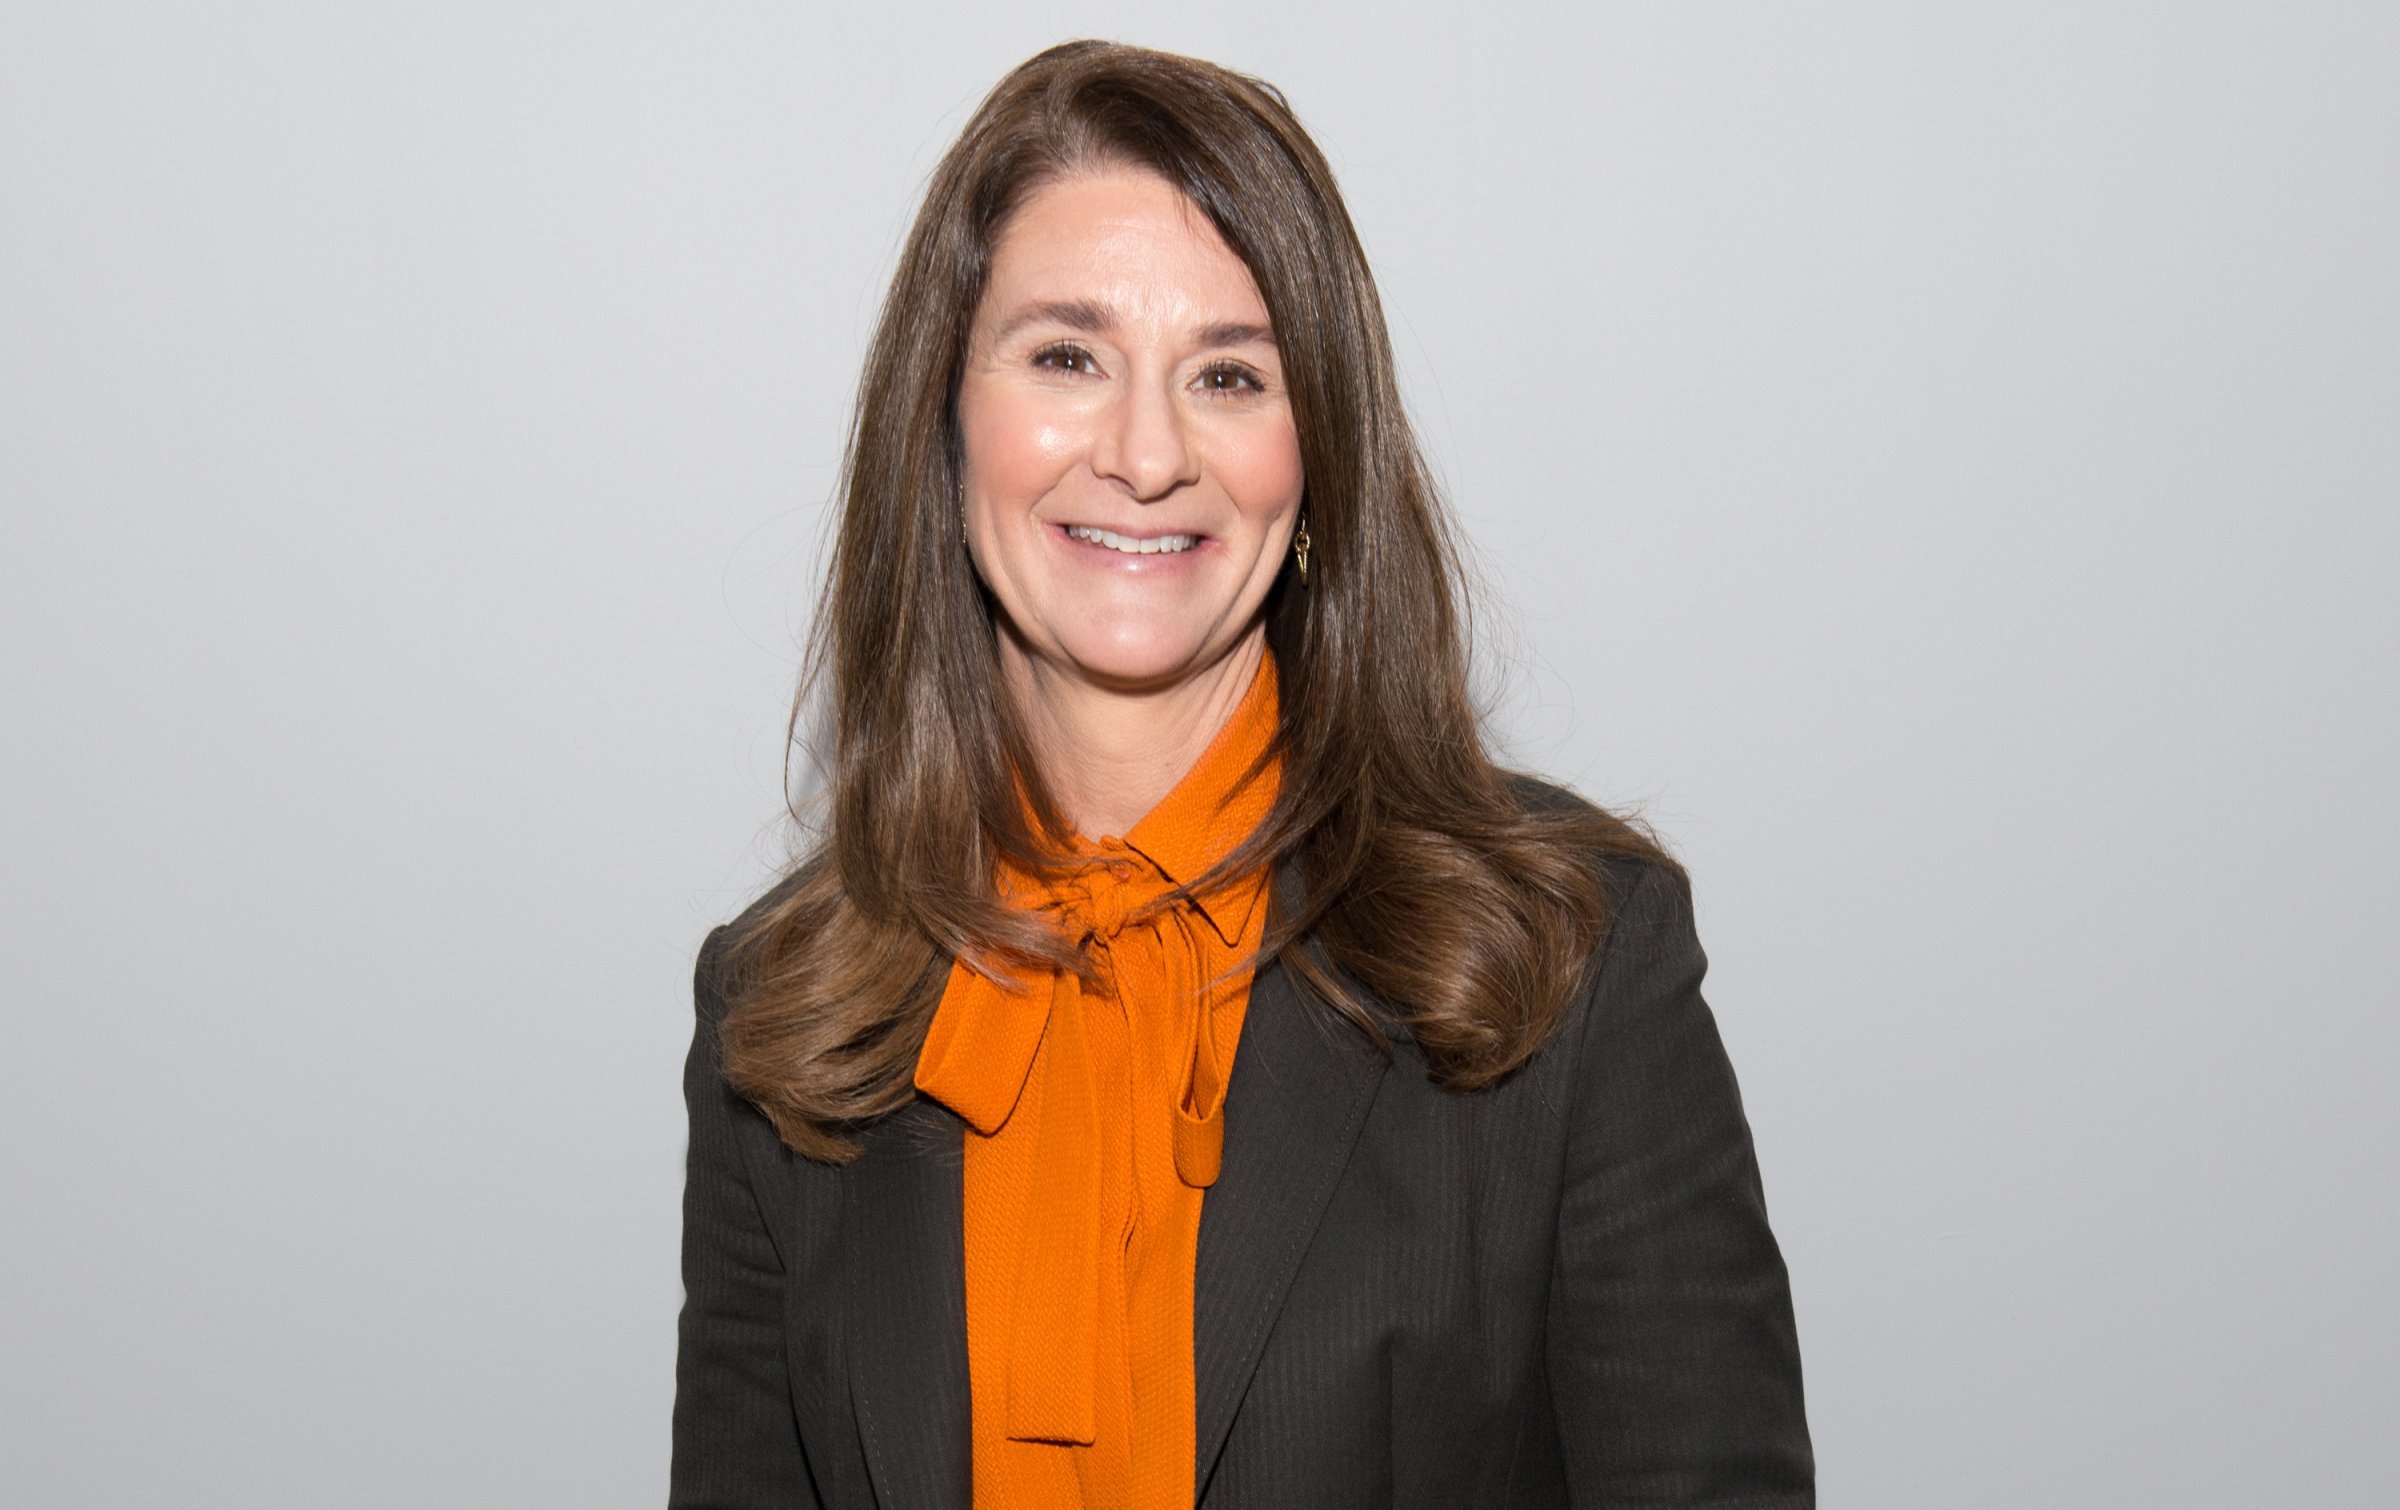 Co-chair of the Bill and Melinda Gates Foundation Melinda Gates attends the AOL BUILD Speaker Series at AOL Studios In New York on March 10, 2015 in New York City.